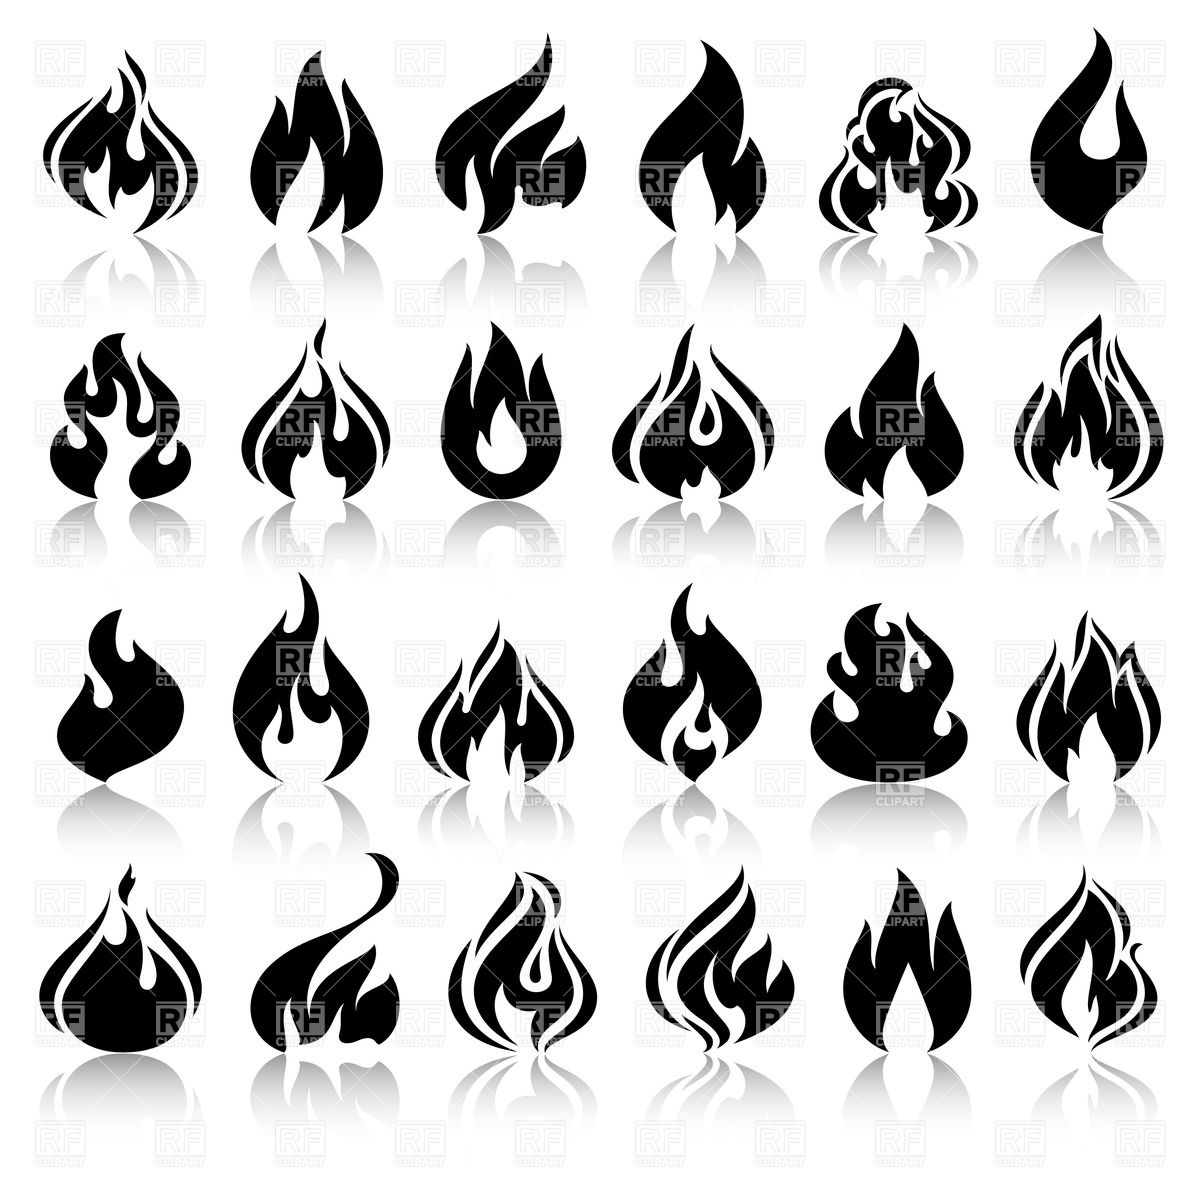 Silhouettes Of Fire And Flame   Set Of Icons 33006 Download Royalty